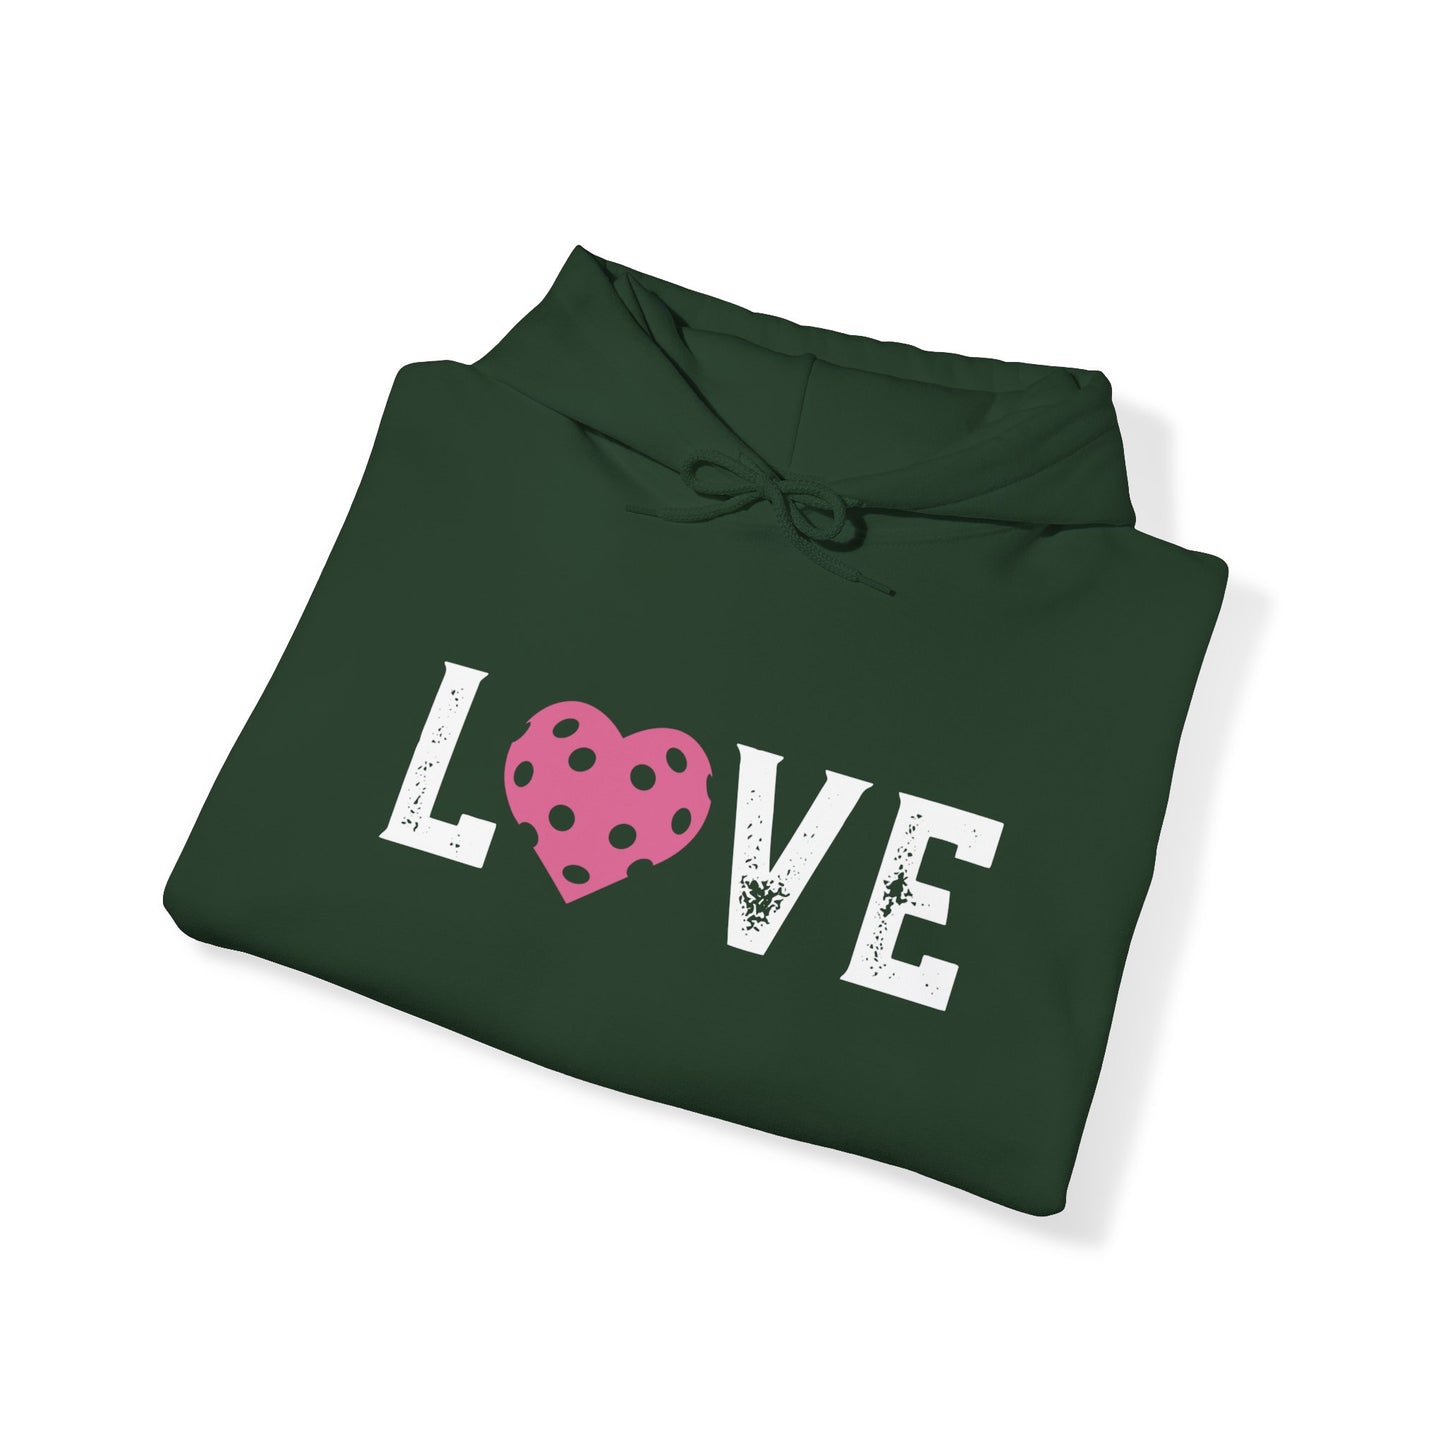 Pickleball LOVE Hoodie   - can customize sleeves & back - add in notes